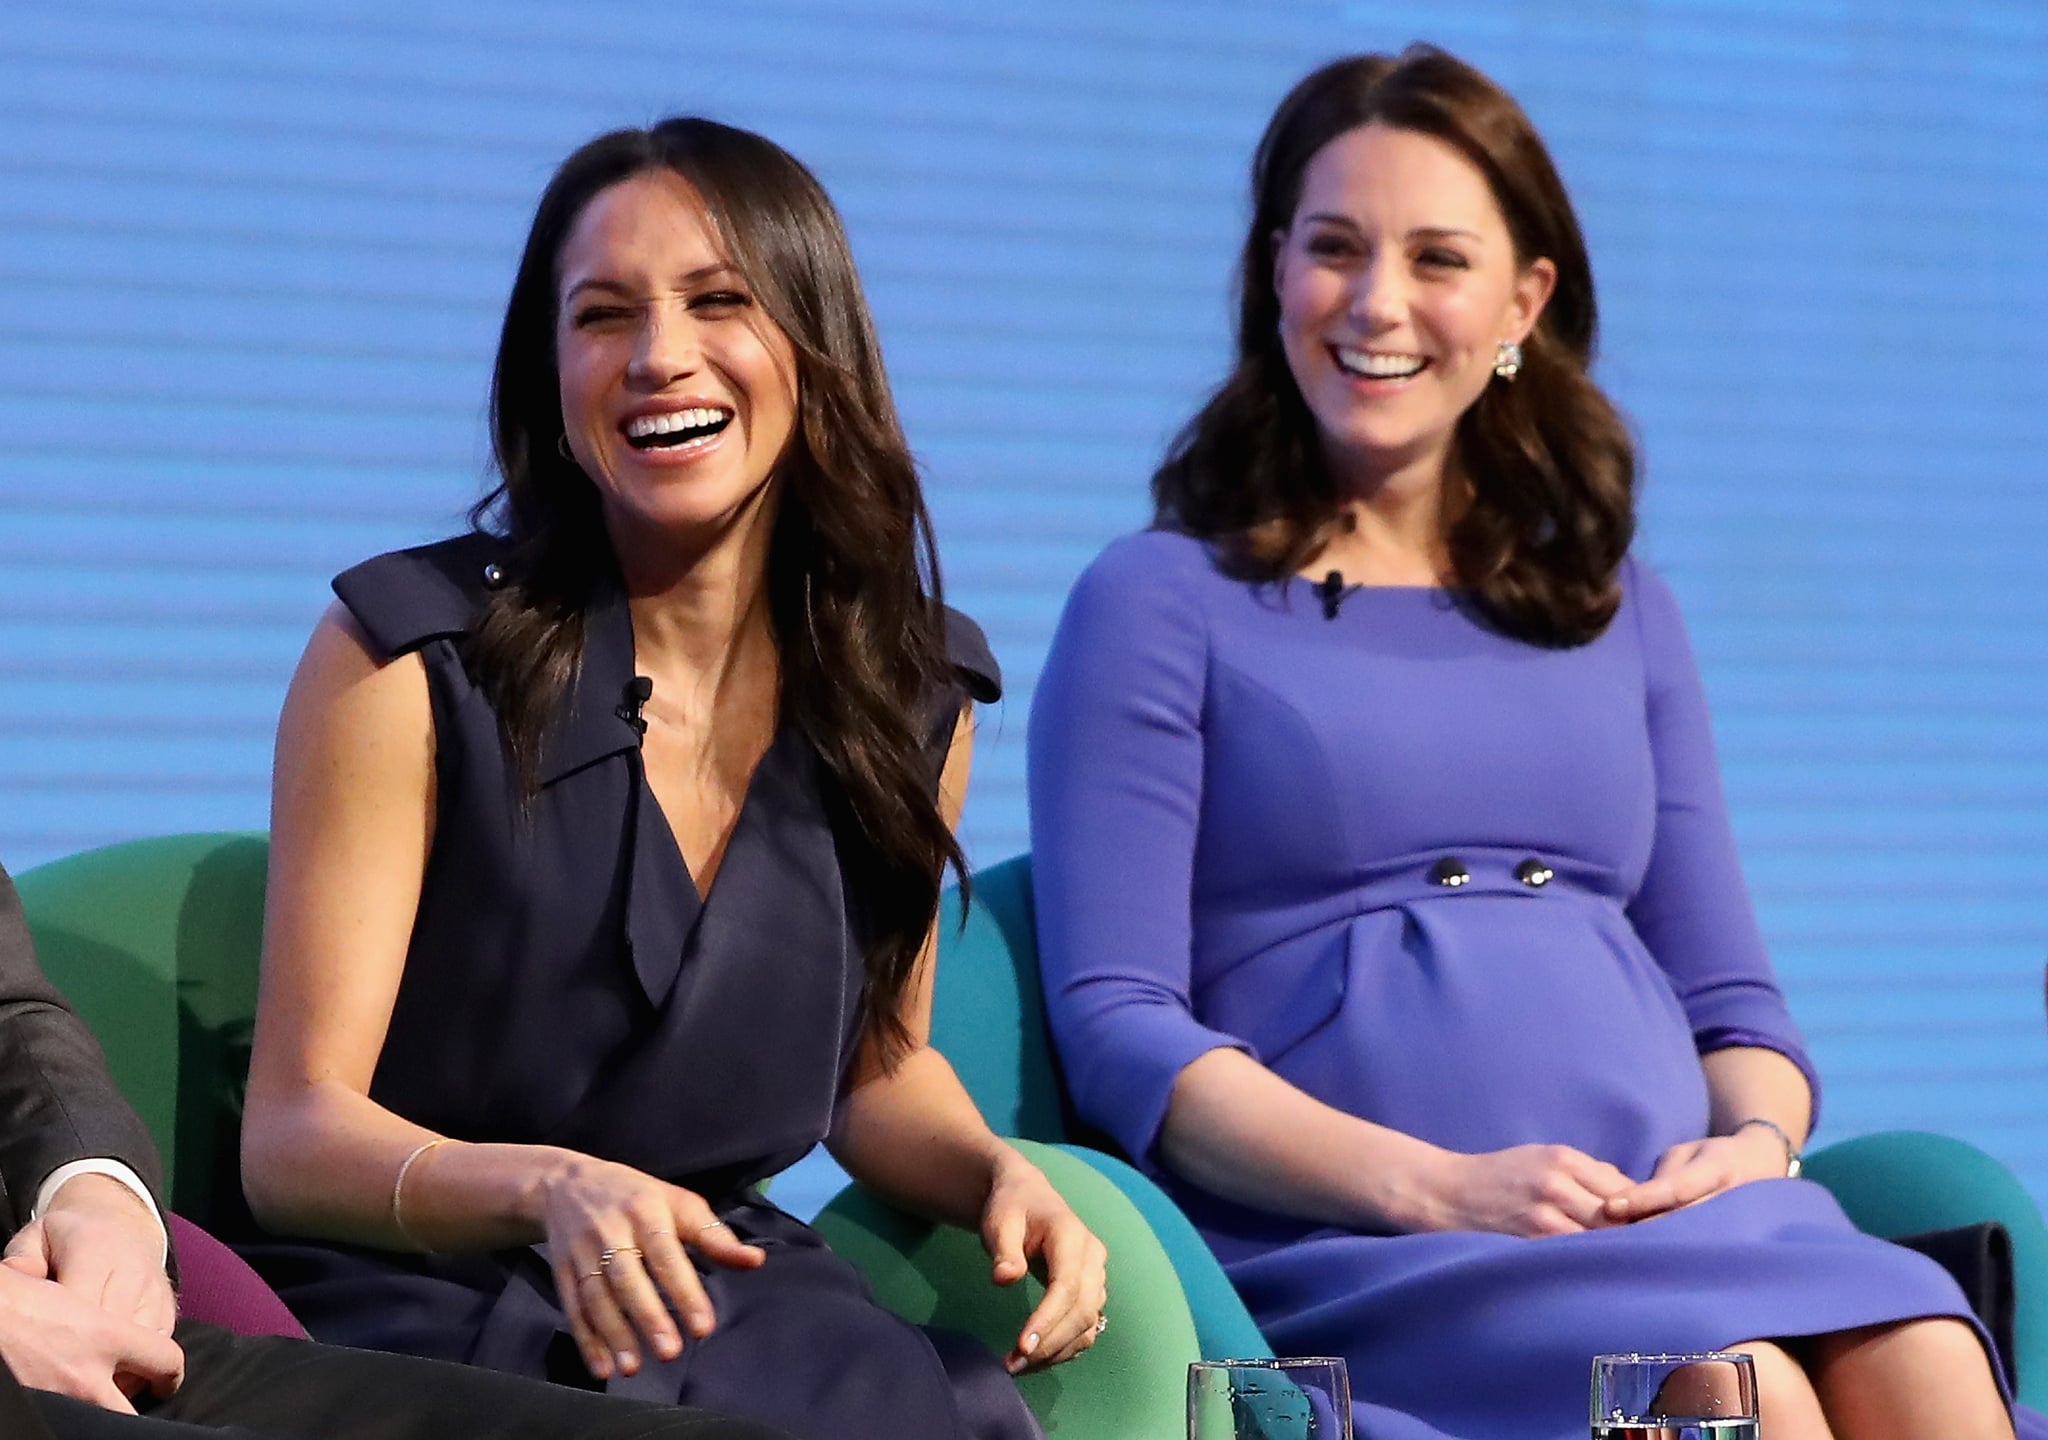 LONDON, ENGLAND - FEBRUARY 28: Meghan Markle and Catherine, Duchess of Cambridge attend the first annual Royal Foundation Forum held at Aviva on February 28, 2018 in London, England. Under the theme 'Making a Difference Together', the event will showcase the programmes run or initiated by The Royal Foundation. (Photo by Chris Jackson - WPA Pool/Getty Images)